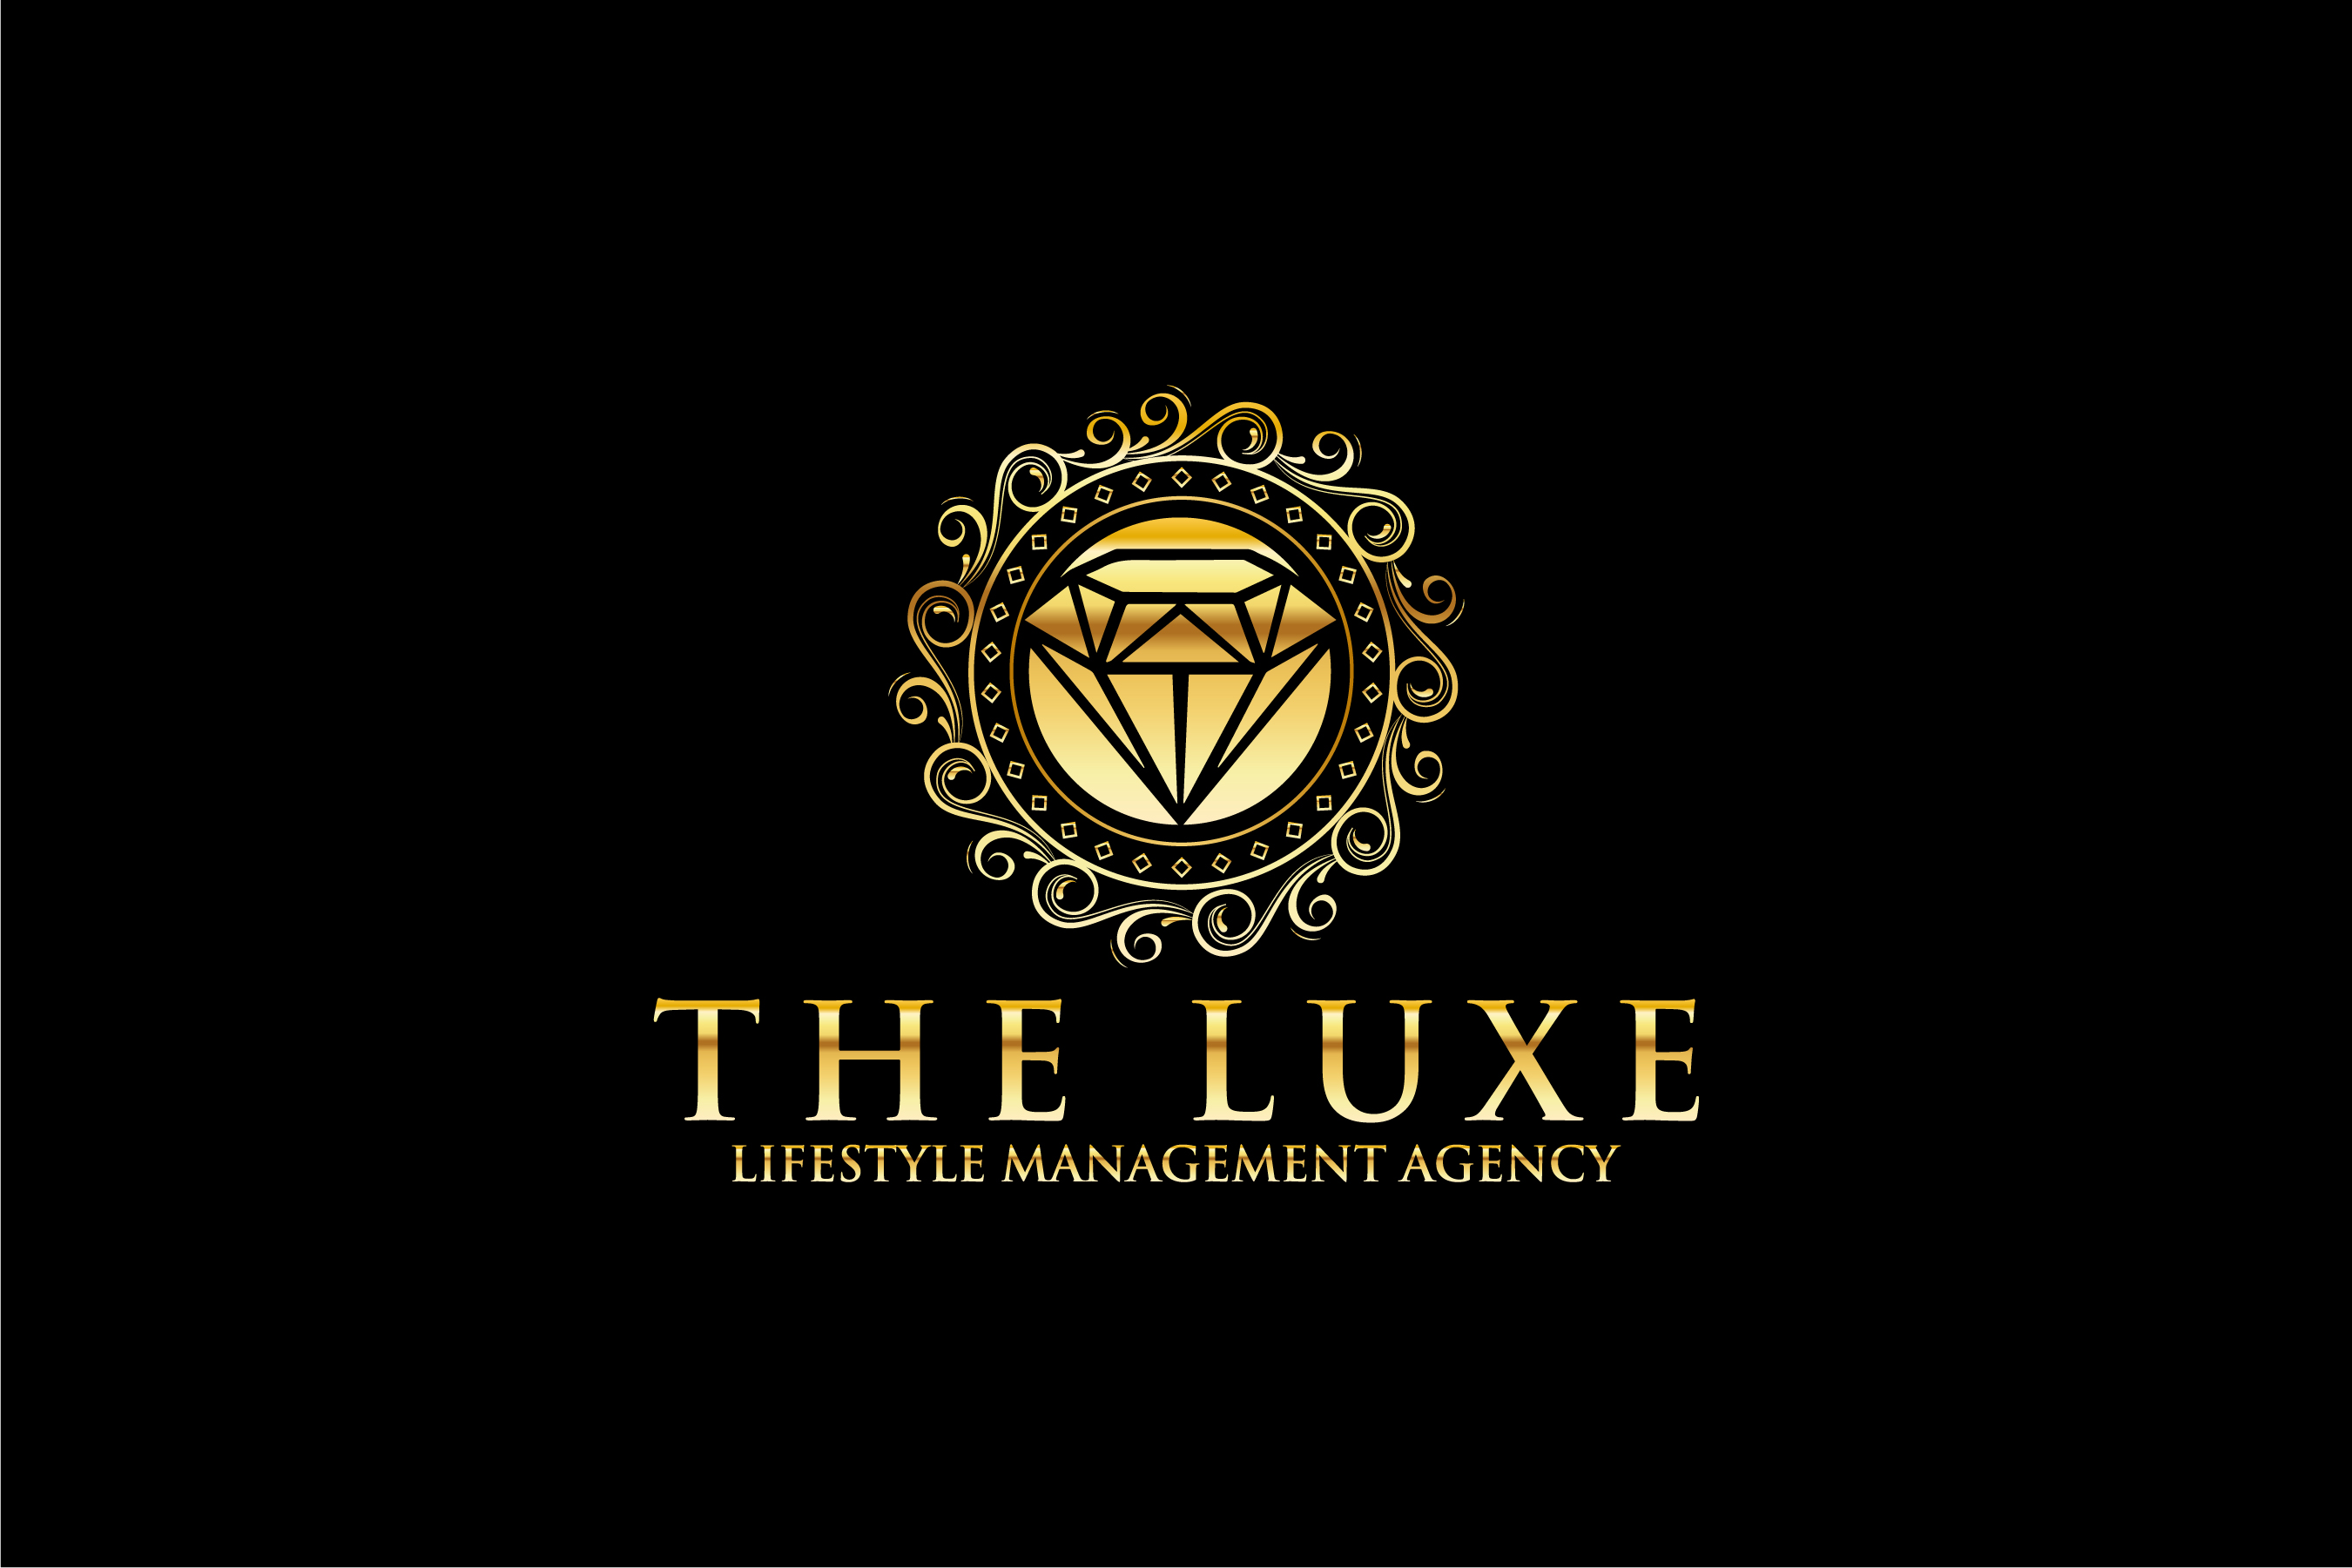 The Luxe Lifestyle Management Agency